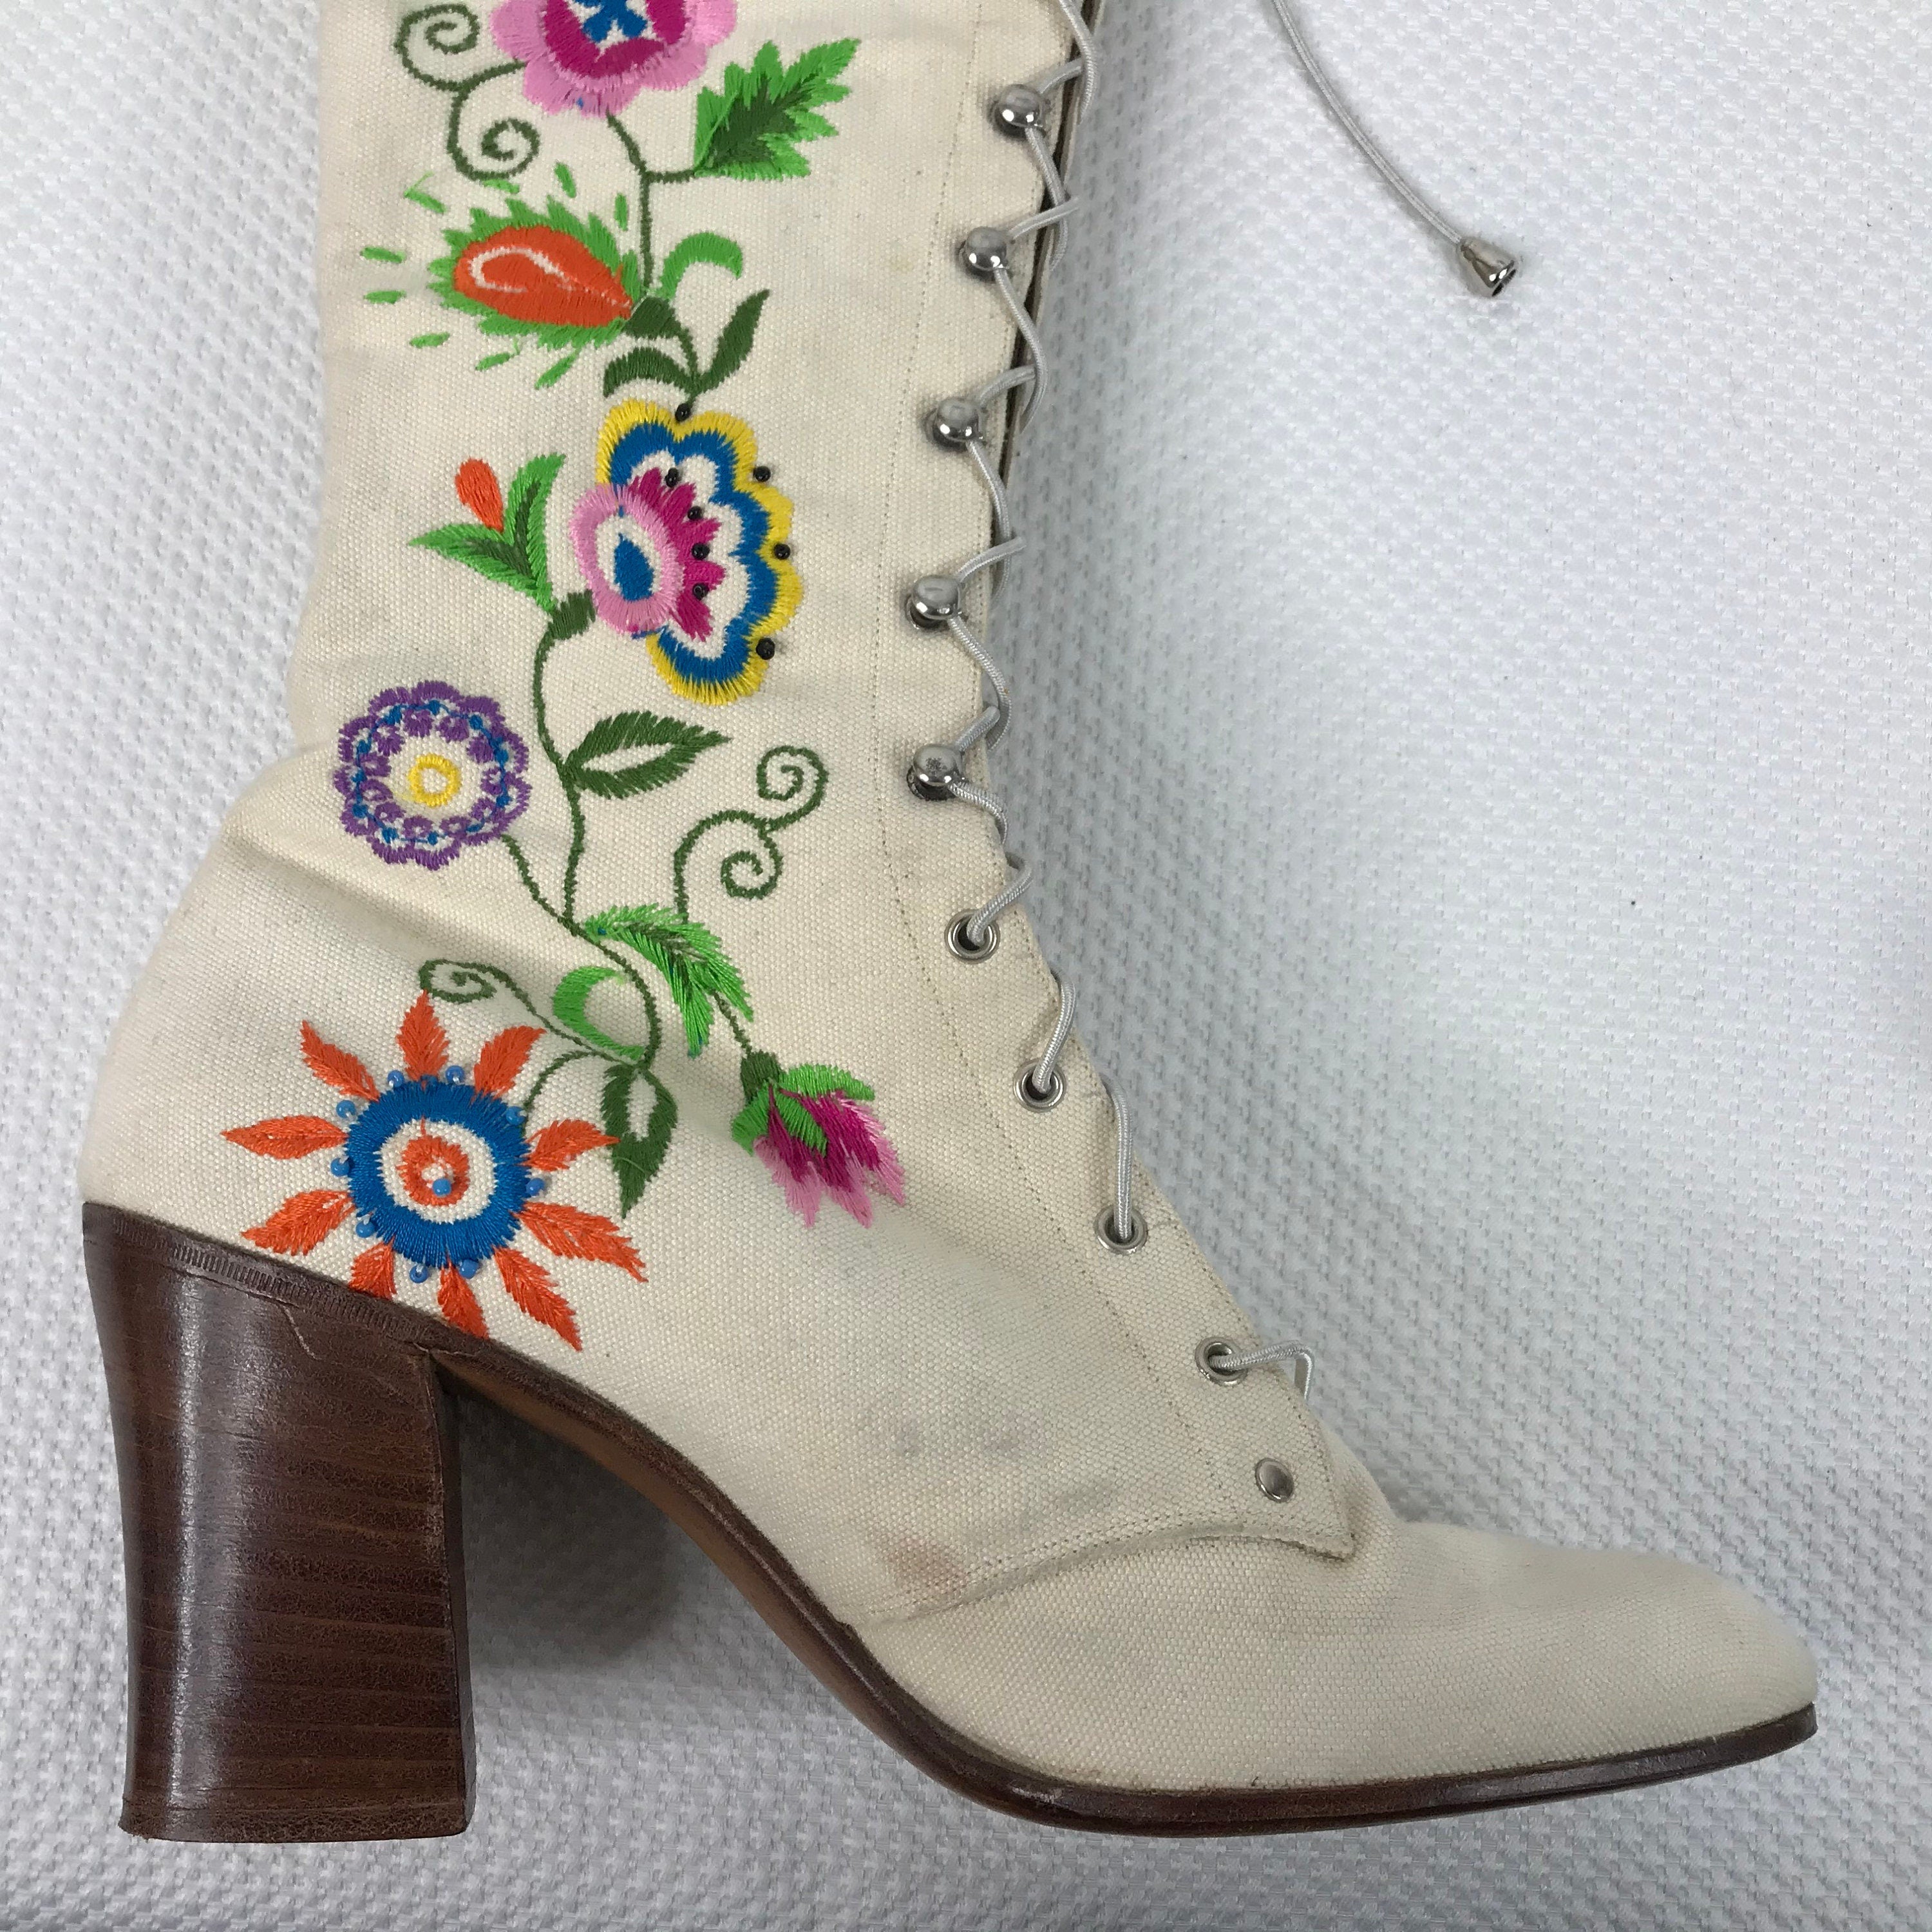 70s Rare Vintage 1975 Jerry Edouard White Floral Beaded Embroidered Granny  Boots Size 7. 5 By Jerry Edouard